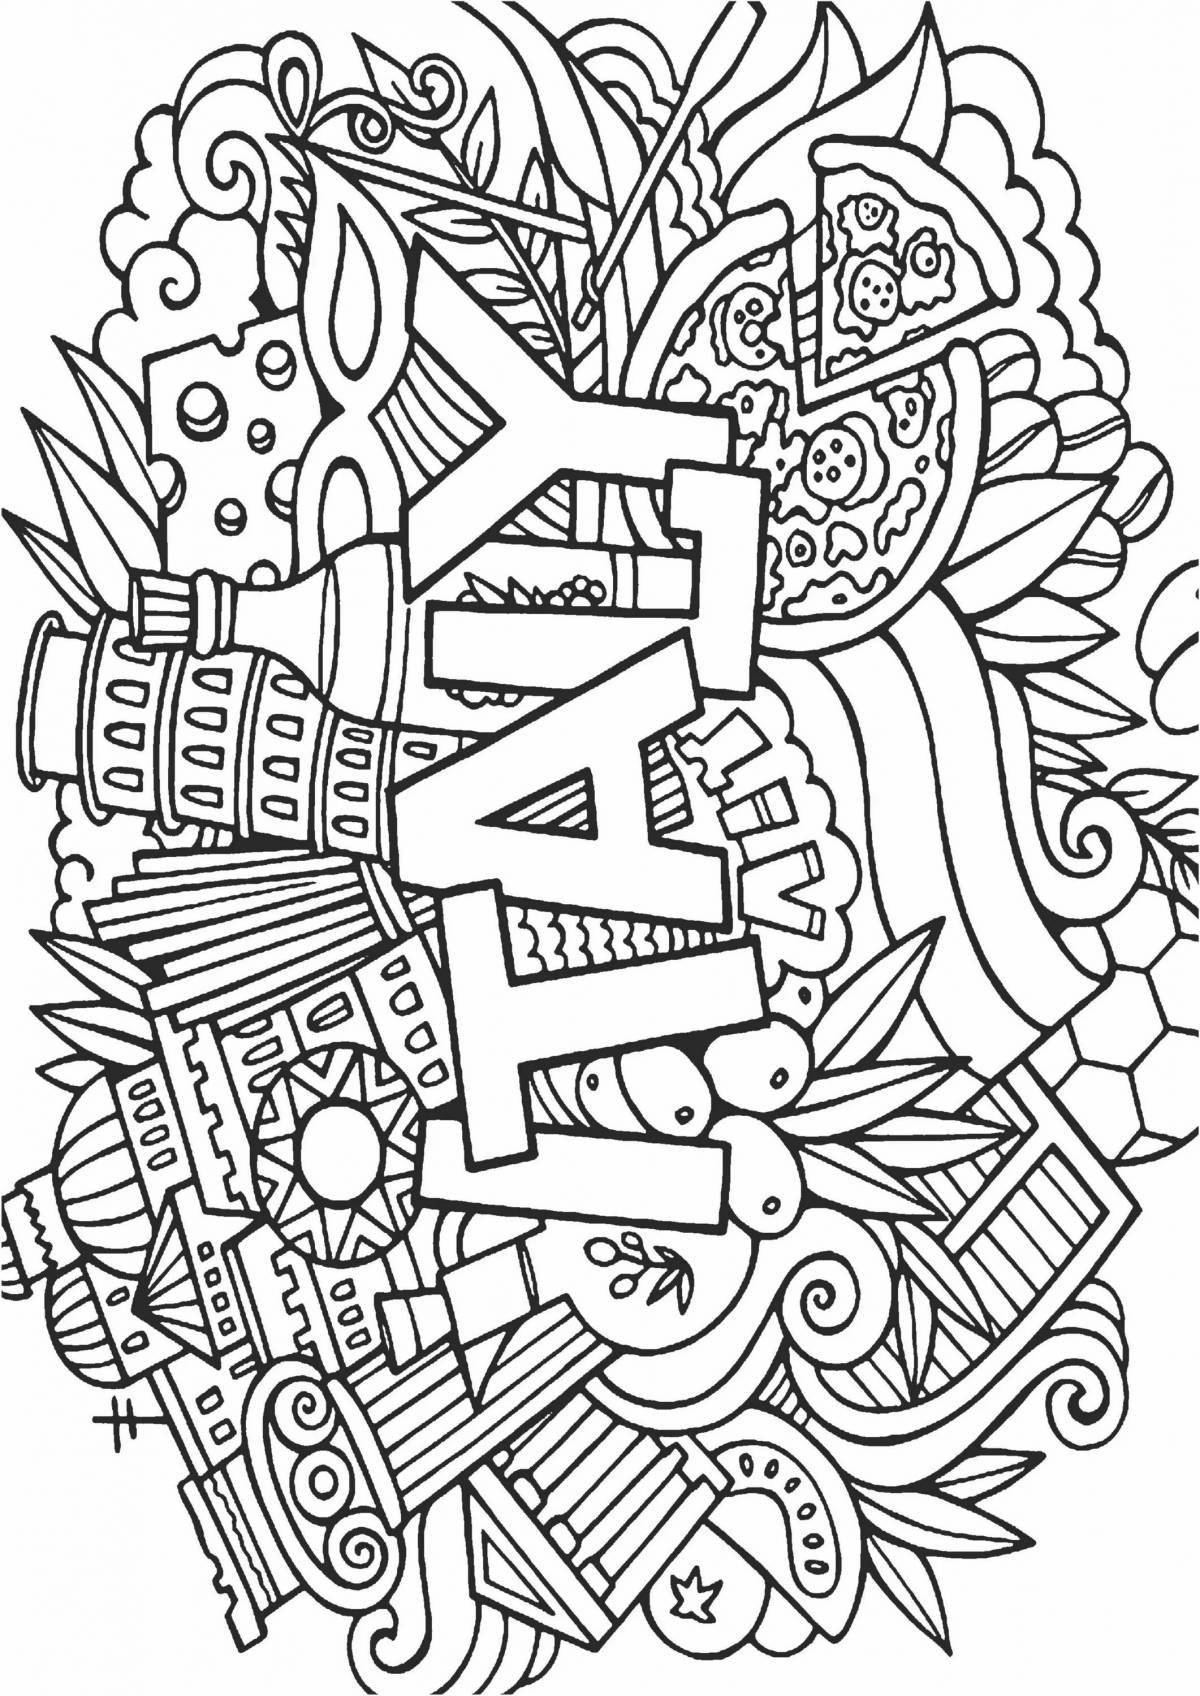 Stylish modern coloring book for adults